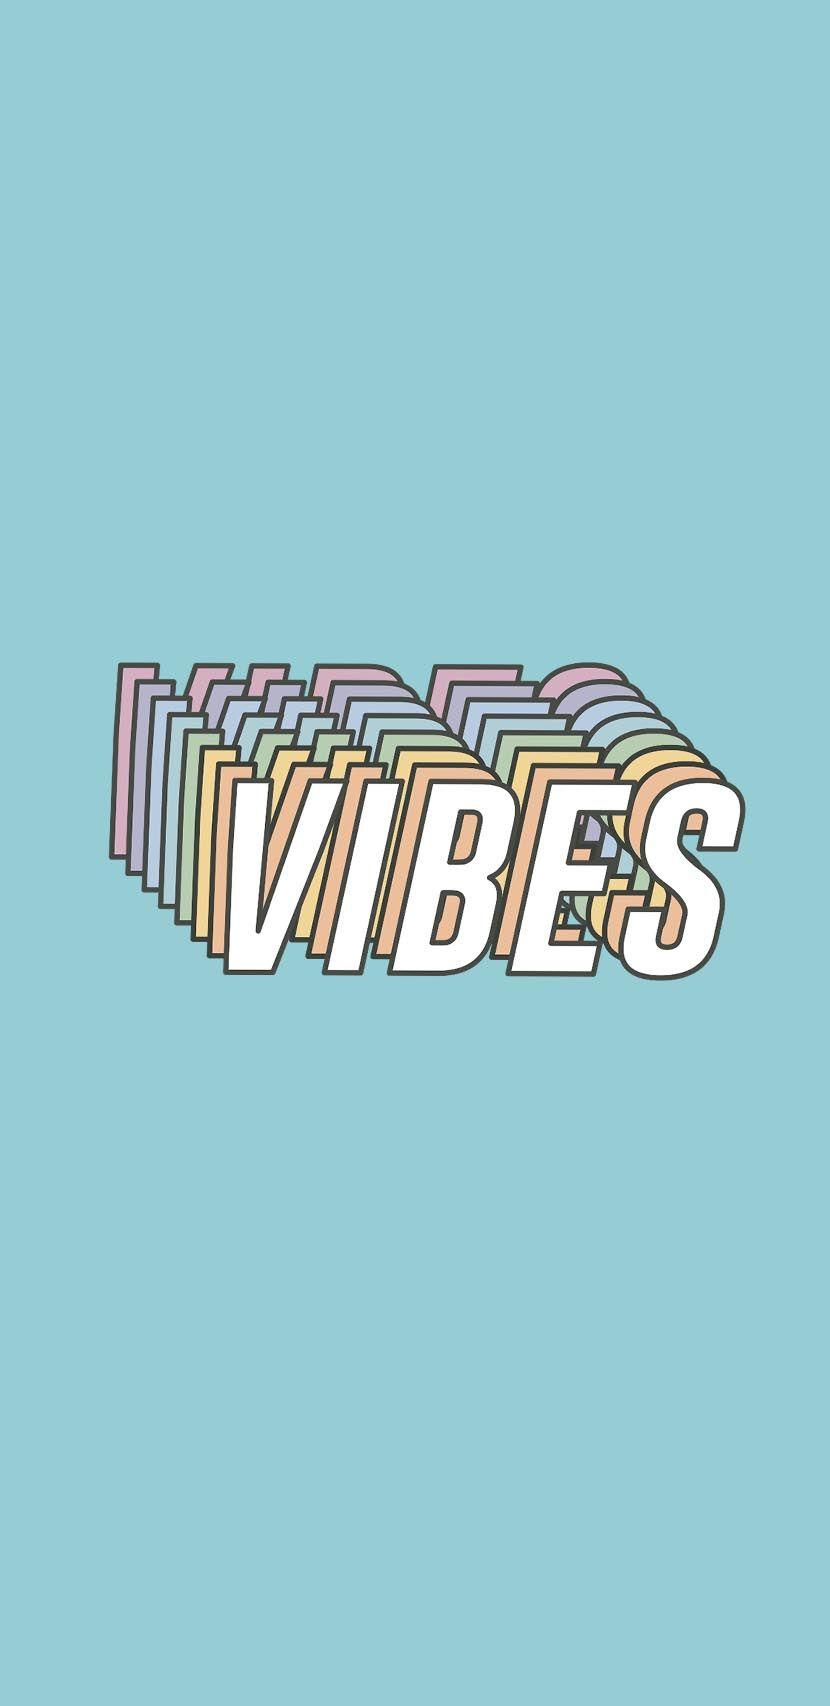 vibes, beach vibes, good vibes, motivational quote, quote, font